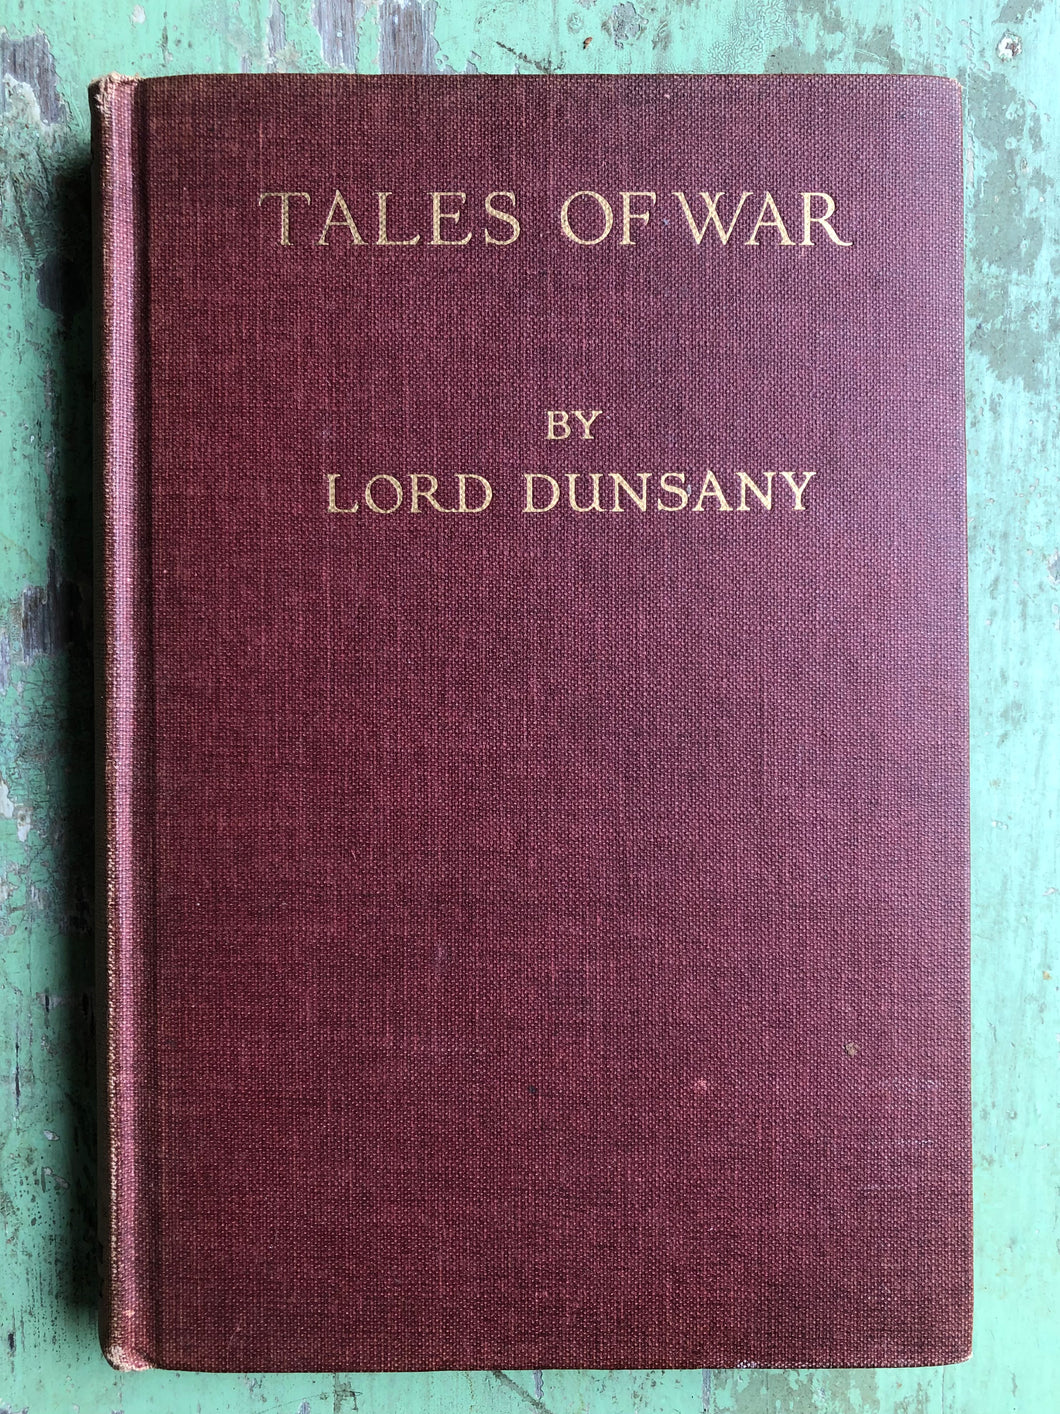 Tales of War by Lord Dunsany